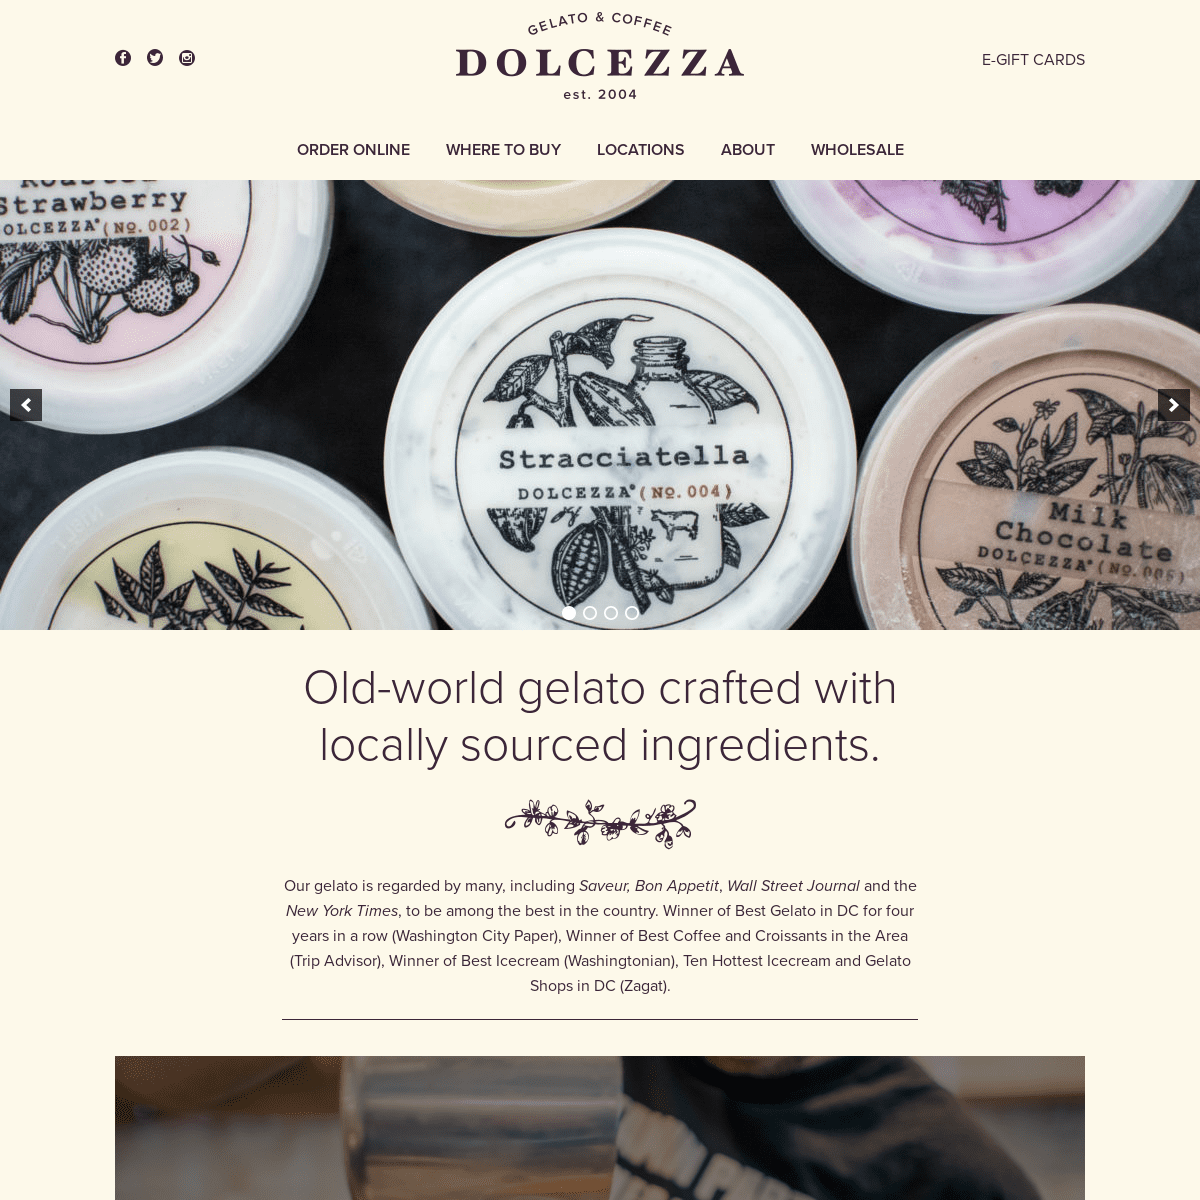 A complete backup of https://dolcezzagelato.com